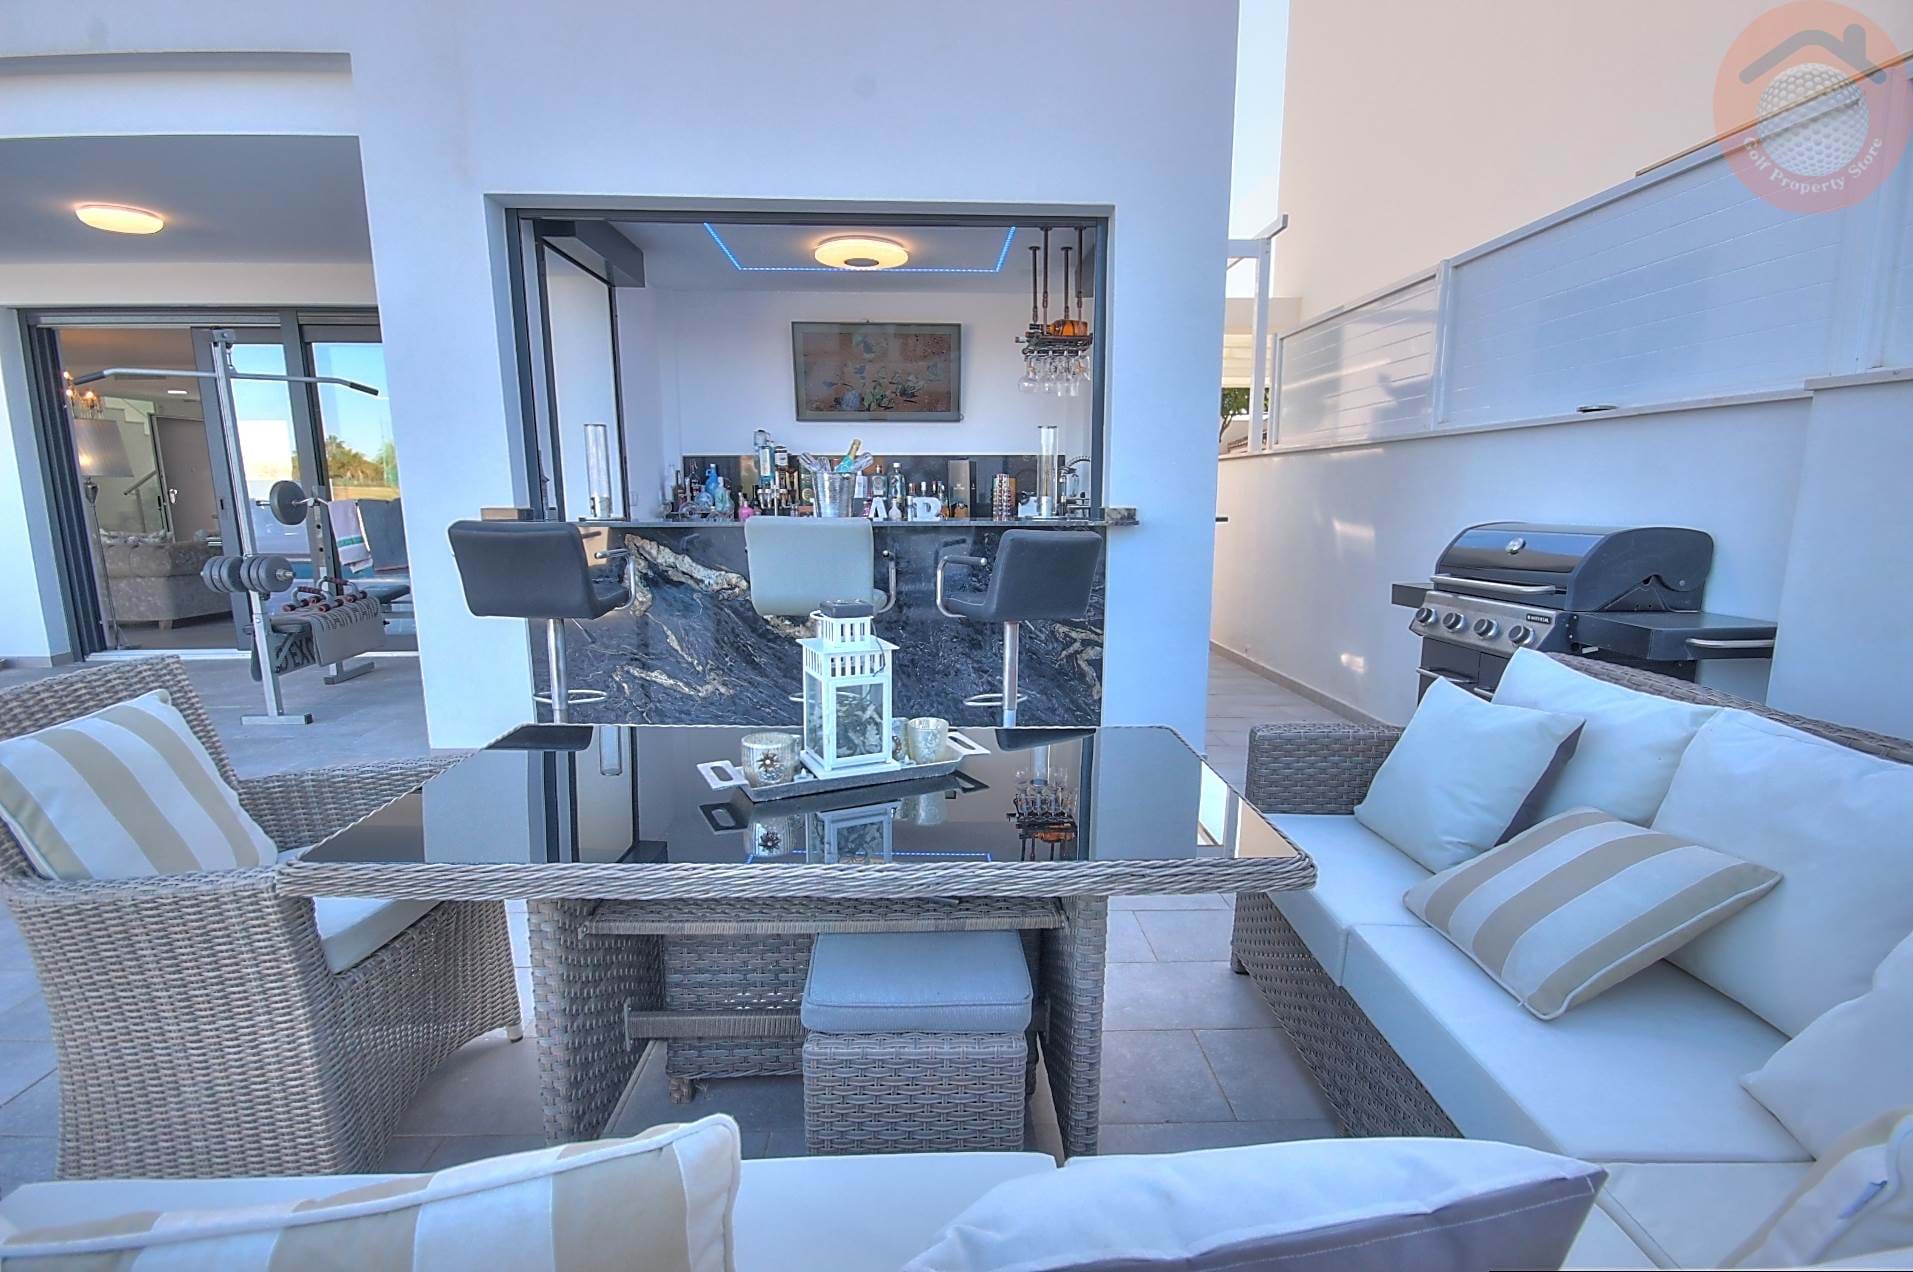 MAR MENOR GOLF RESORT STUNNING 3 BED 4 BATH FRONTLINE GOLF WITH PRIVATE POOL HOT TUB AND BAR